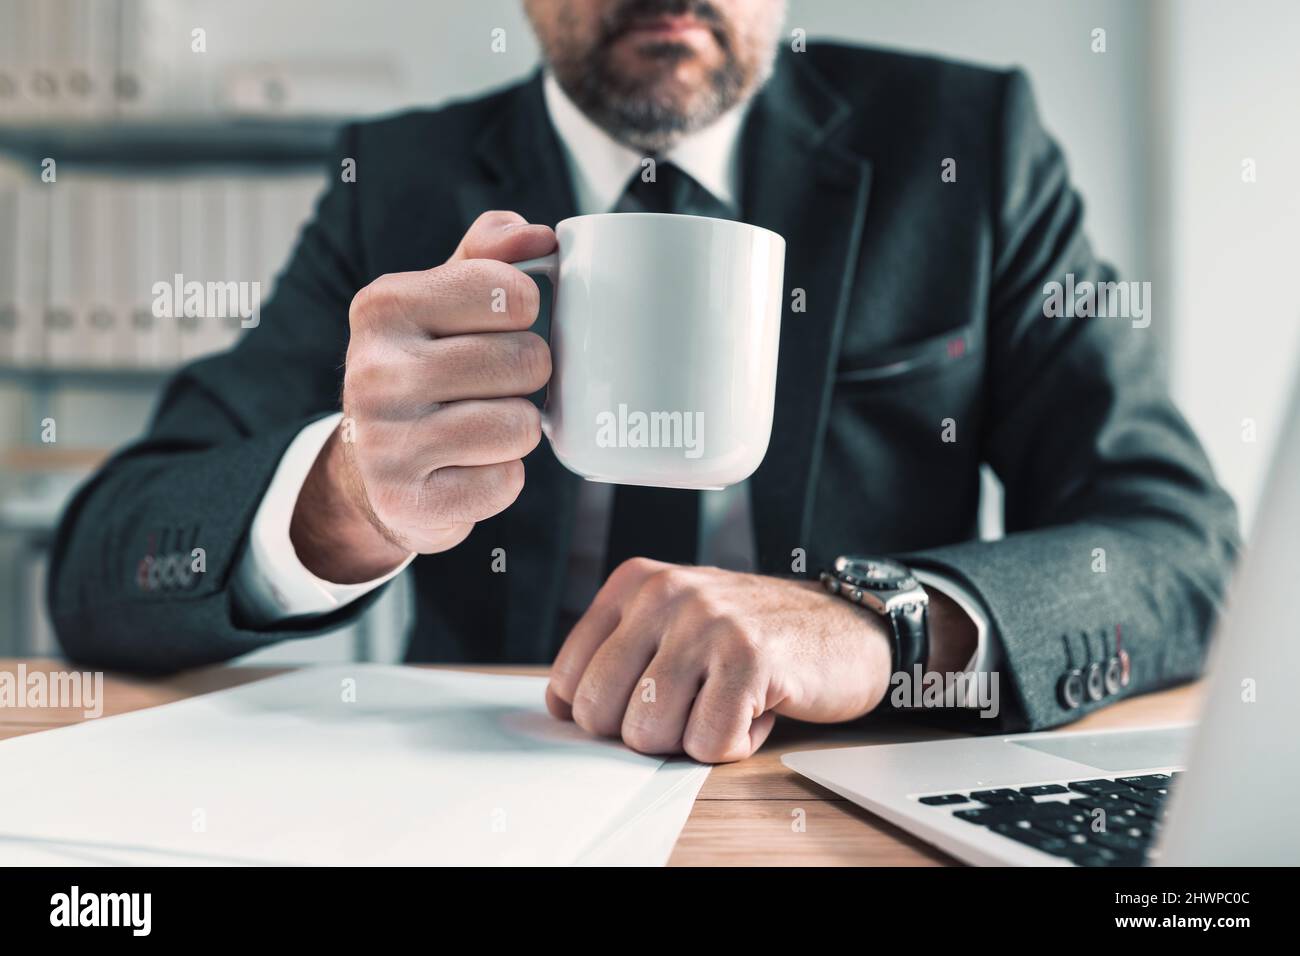 Elegant male business person on coffee break in office, businessman holding white cup of hot coffee, selective focus Stock Photo